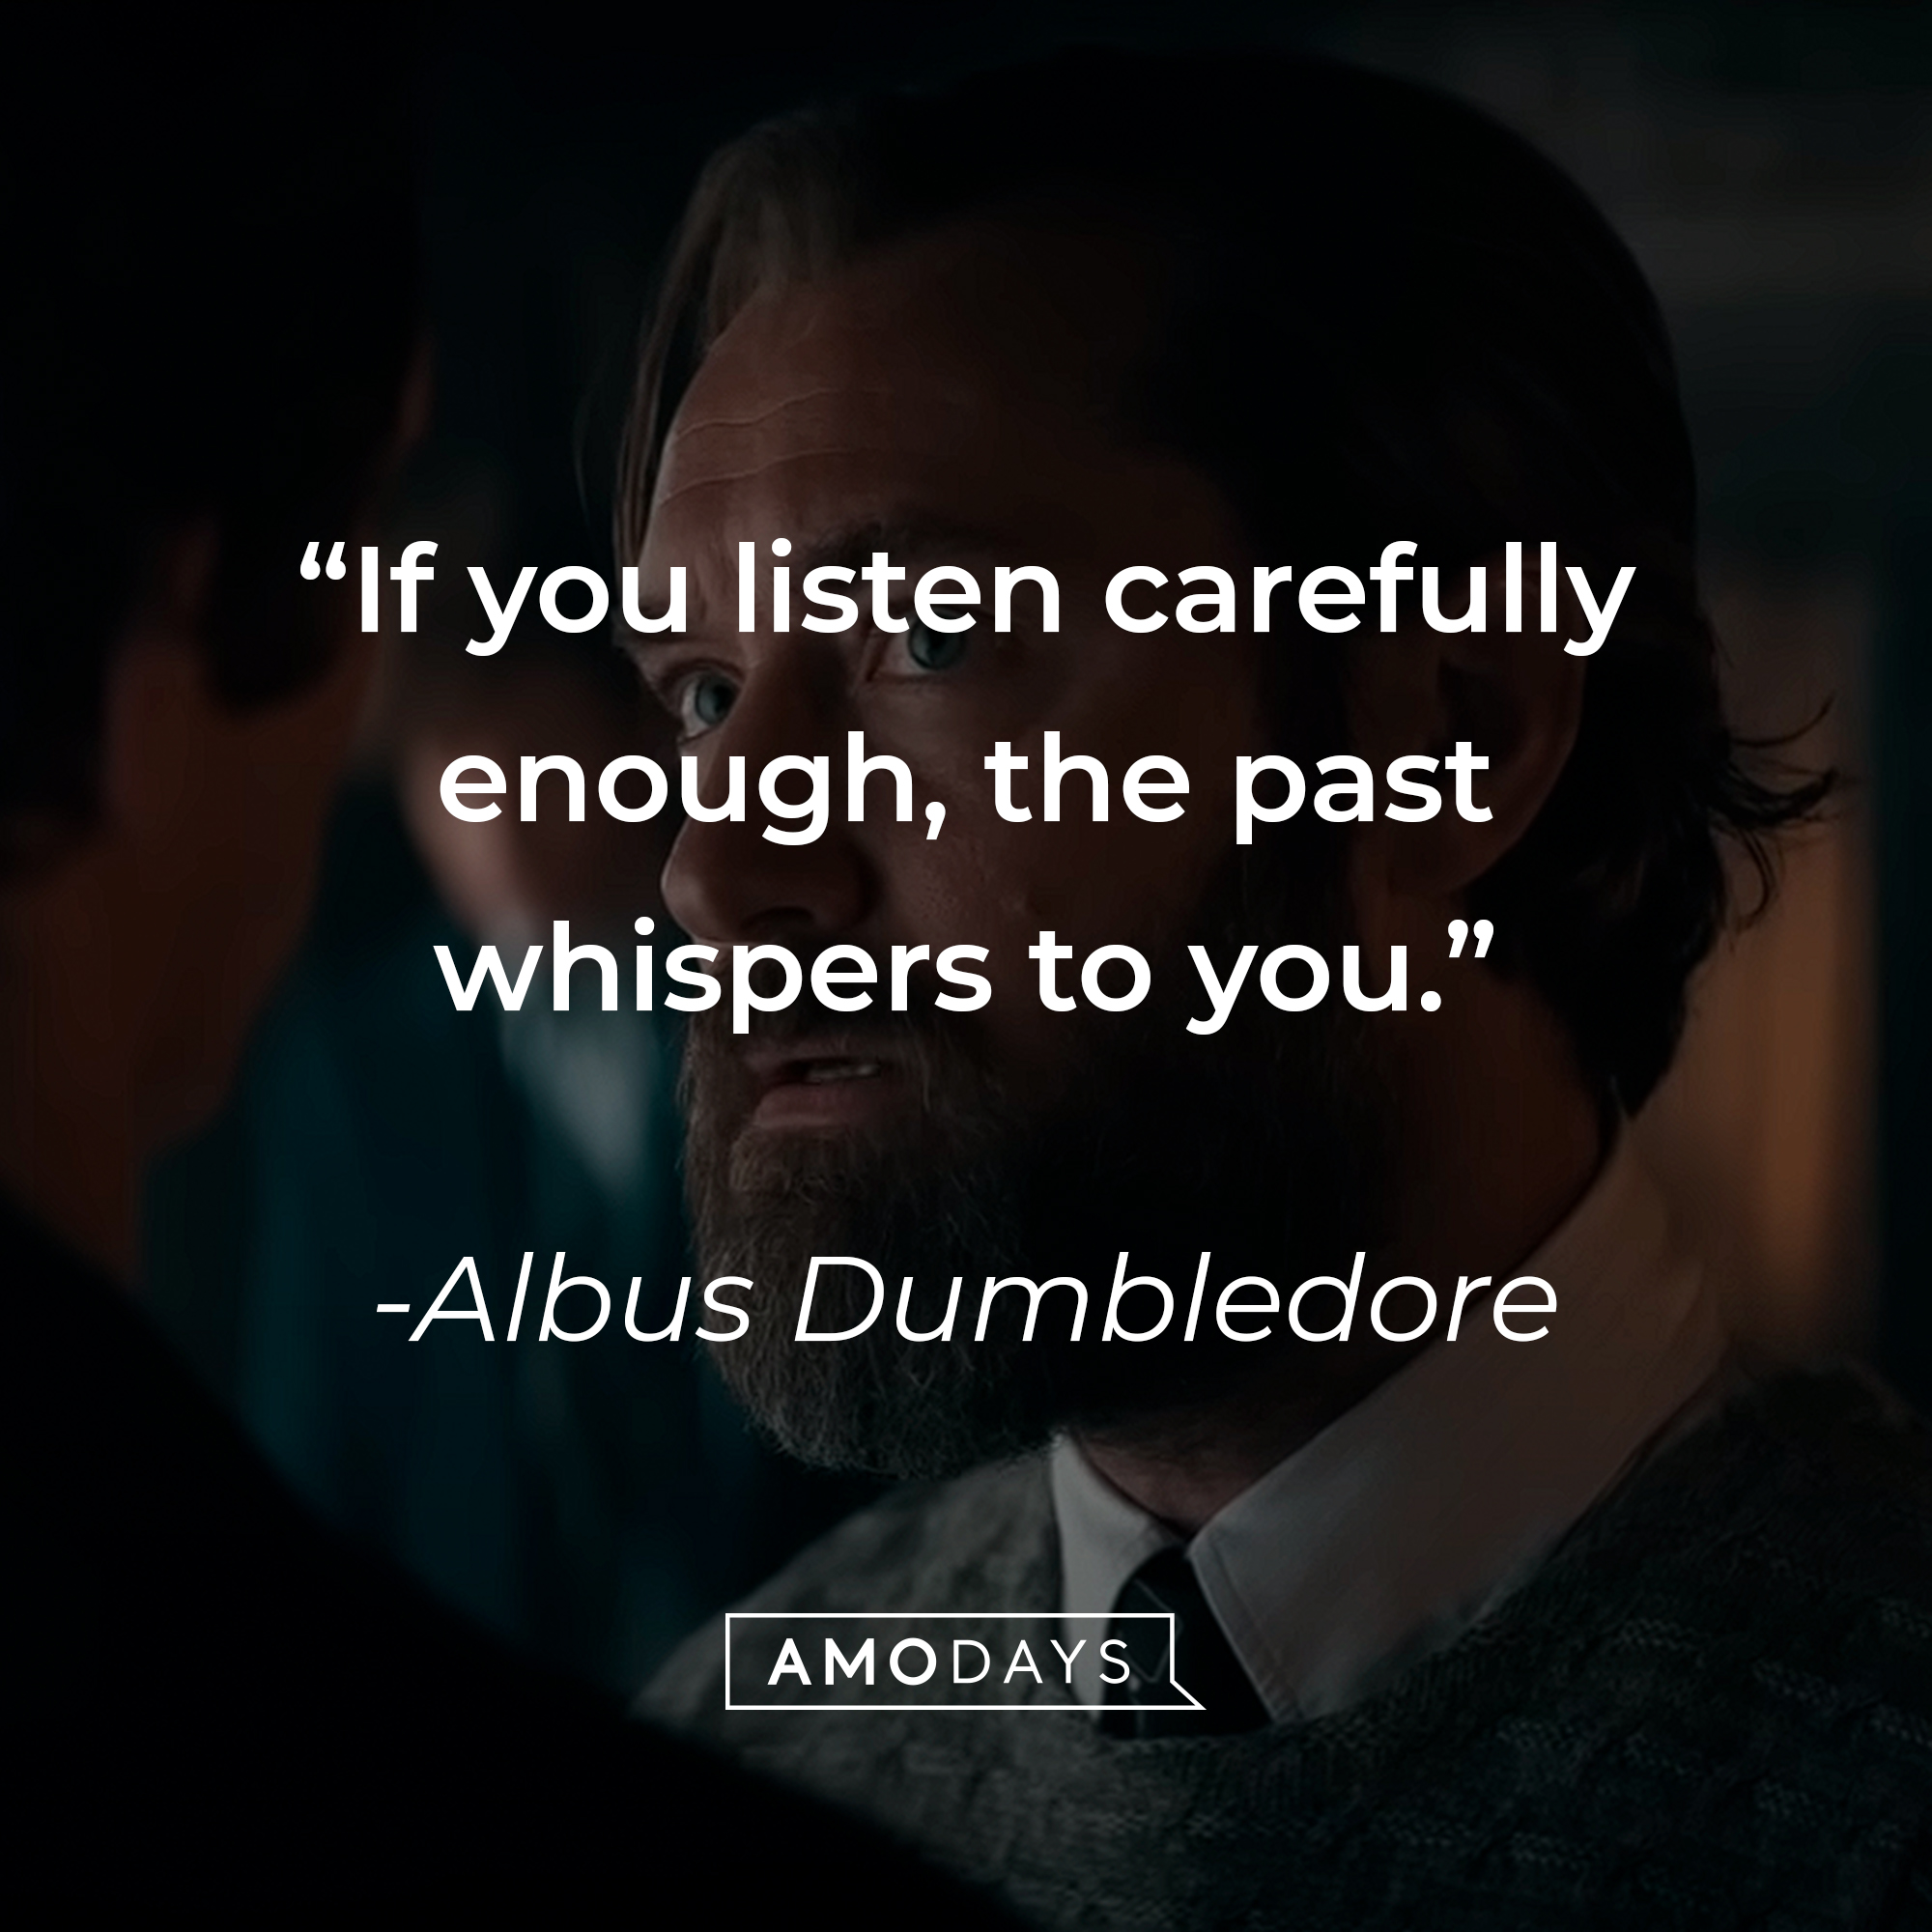 Albus Dumbledore, with his quote: “If you listen carefully enough, the past whispers to you.” | Source: Youtube.com/WarnerBrosPictures